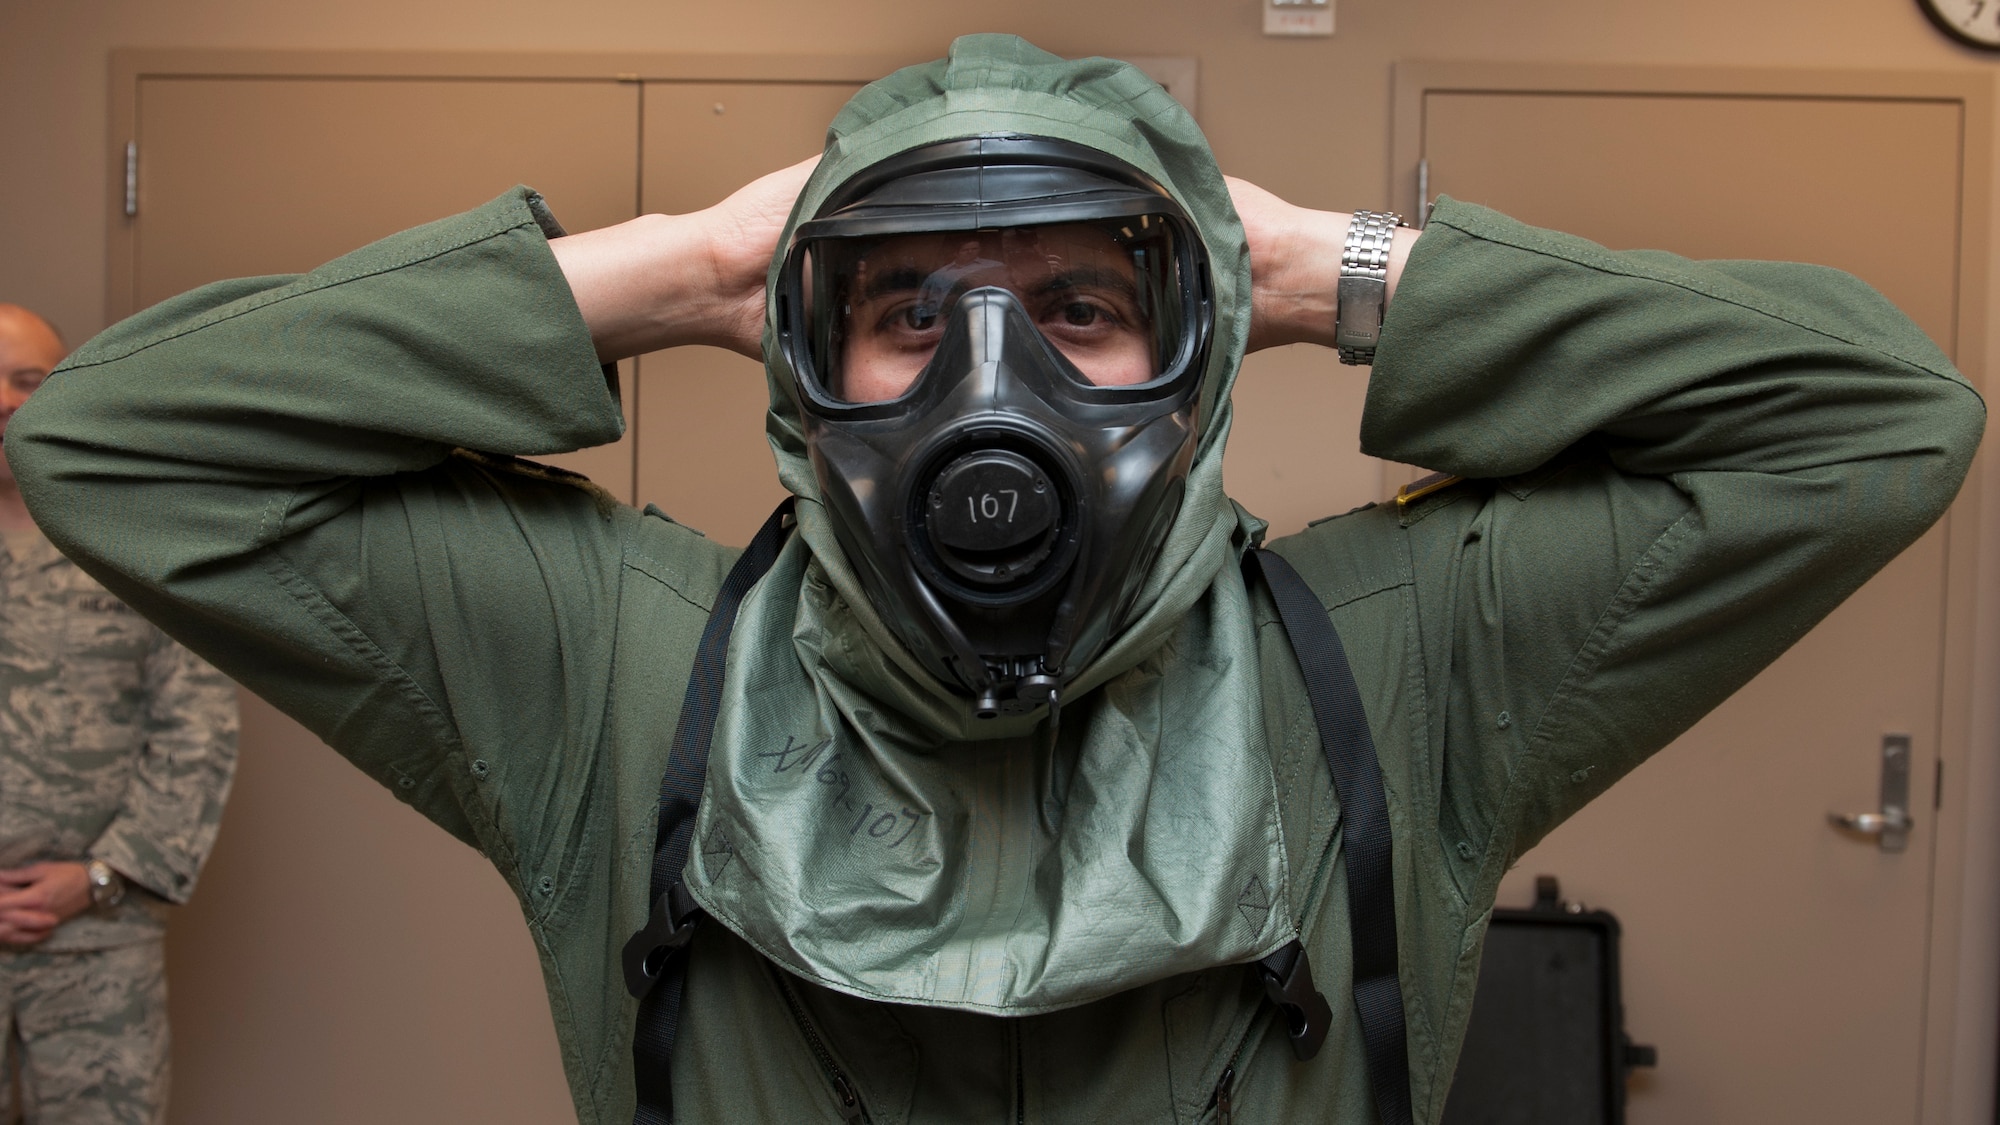 Capt. Edward Silva, 436th Operations Support Squadron Aircrew Flight Equipment commander, dons the XM69 Aircrew Chemical, Biological, Radiological and Nuclear Defense (CBRN) system March 2, 2016, inside the Aircrew Flight Equipment facility on Dover Air Force Base, Del. A Joint Service Aircrew Mask Strategic Program team partnered with the 436th OSS/AFE to conducted comfort and endurance wear trails and developmental tests on the XM69. (U.S. Air Force photo/Senior Airman Zachary Cacicia)